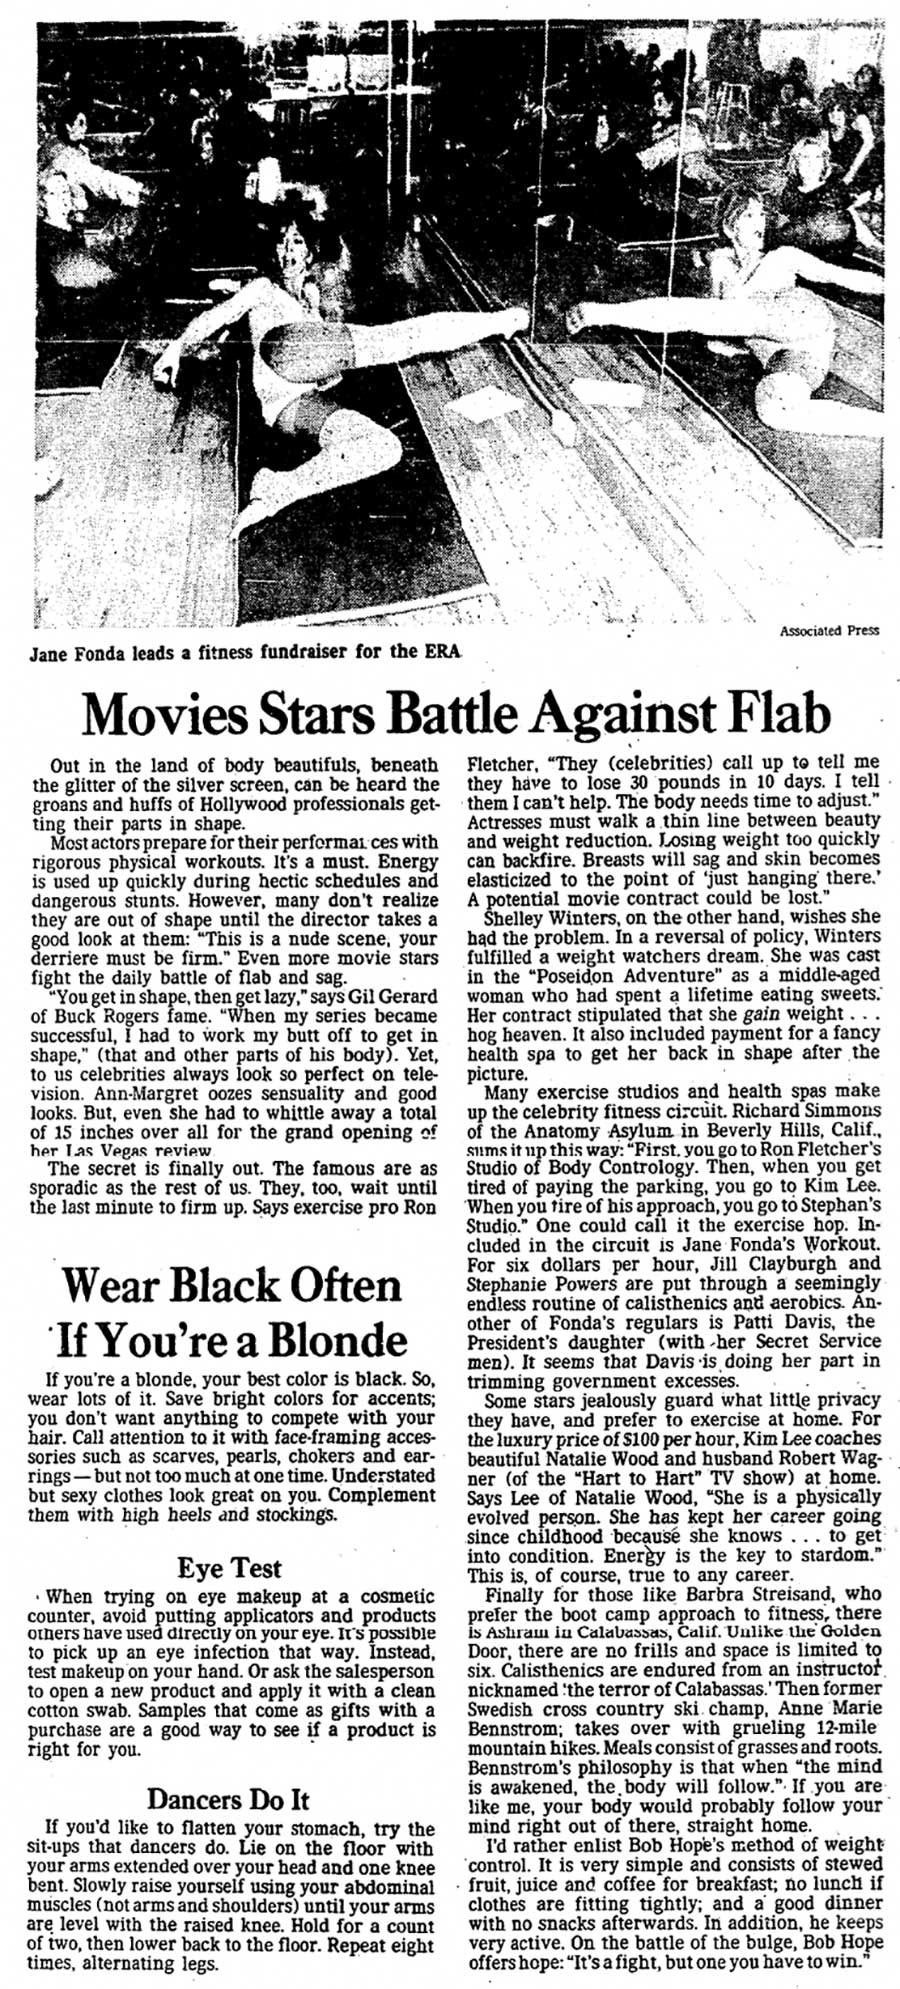 "Movie Stars Battle Against Flab" pilates archive article